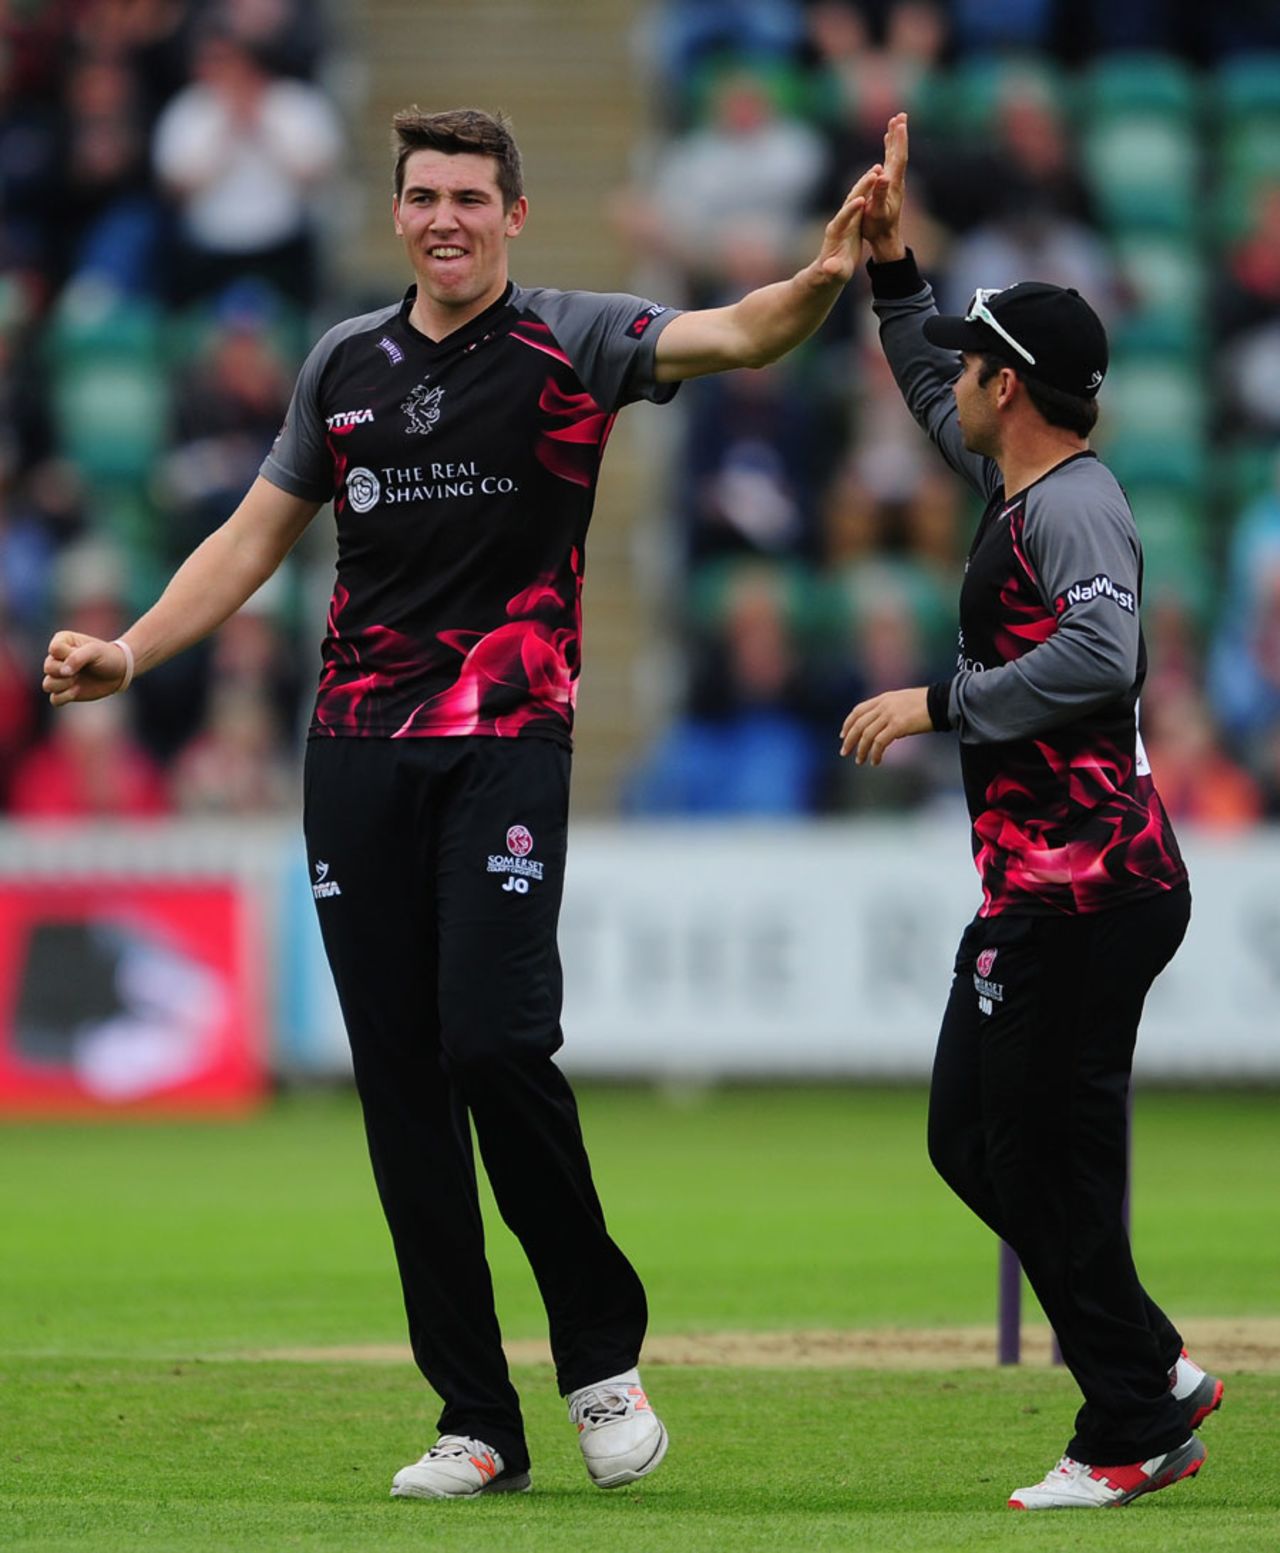 Jamie Overton was among the wickets, Somerset v Hampshire, NatWest T20 Blast, South Group, June 19, 2016